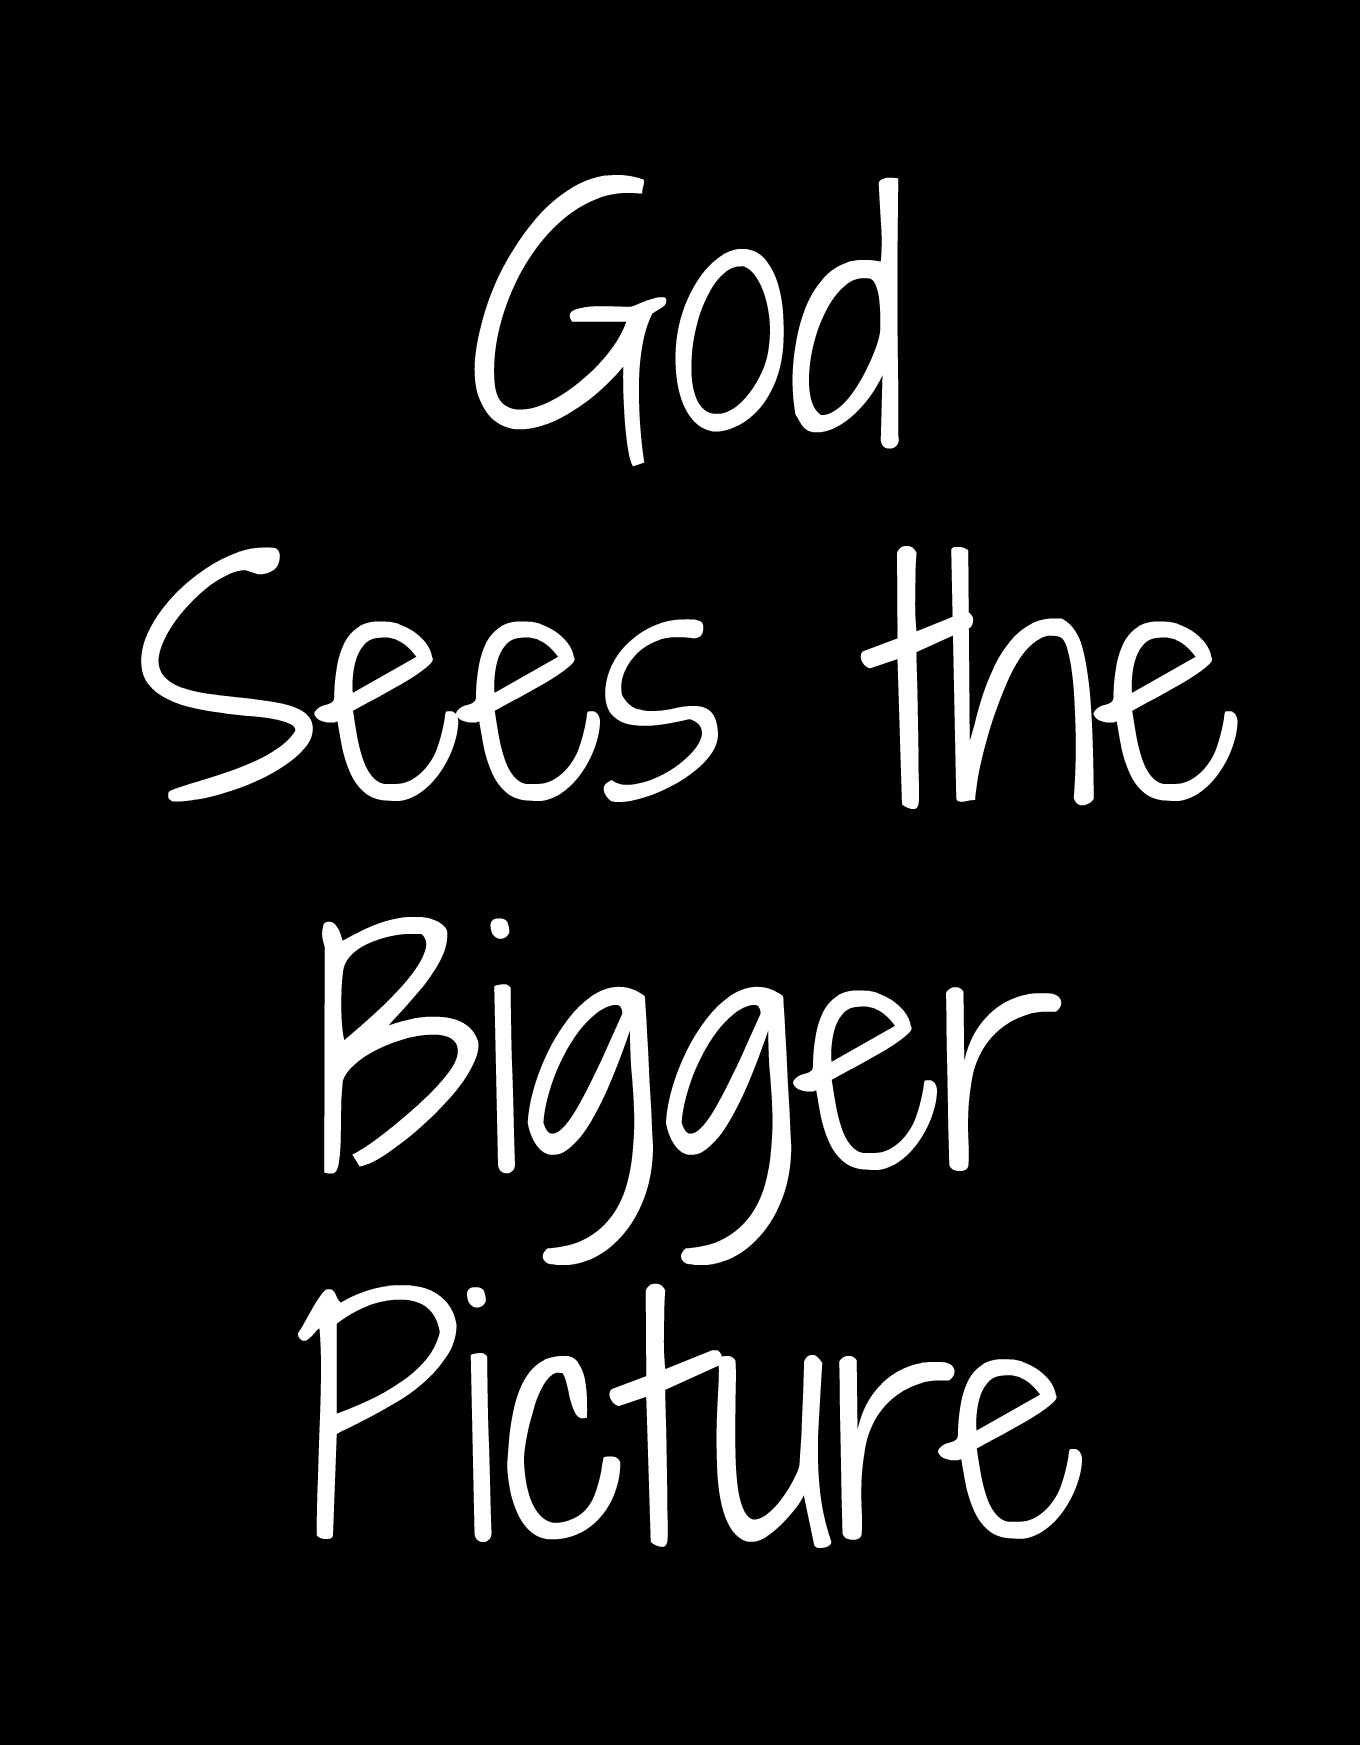 God Sees The Bigger Picture - Cyndi Spivey